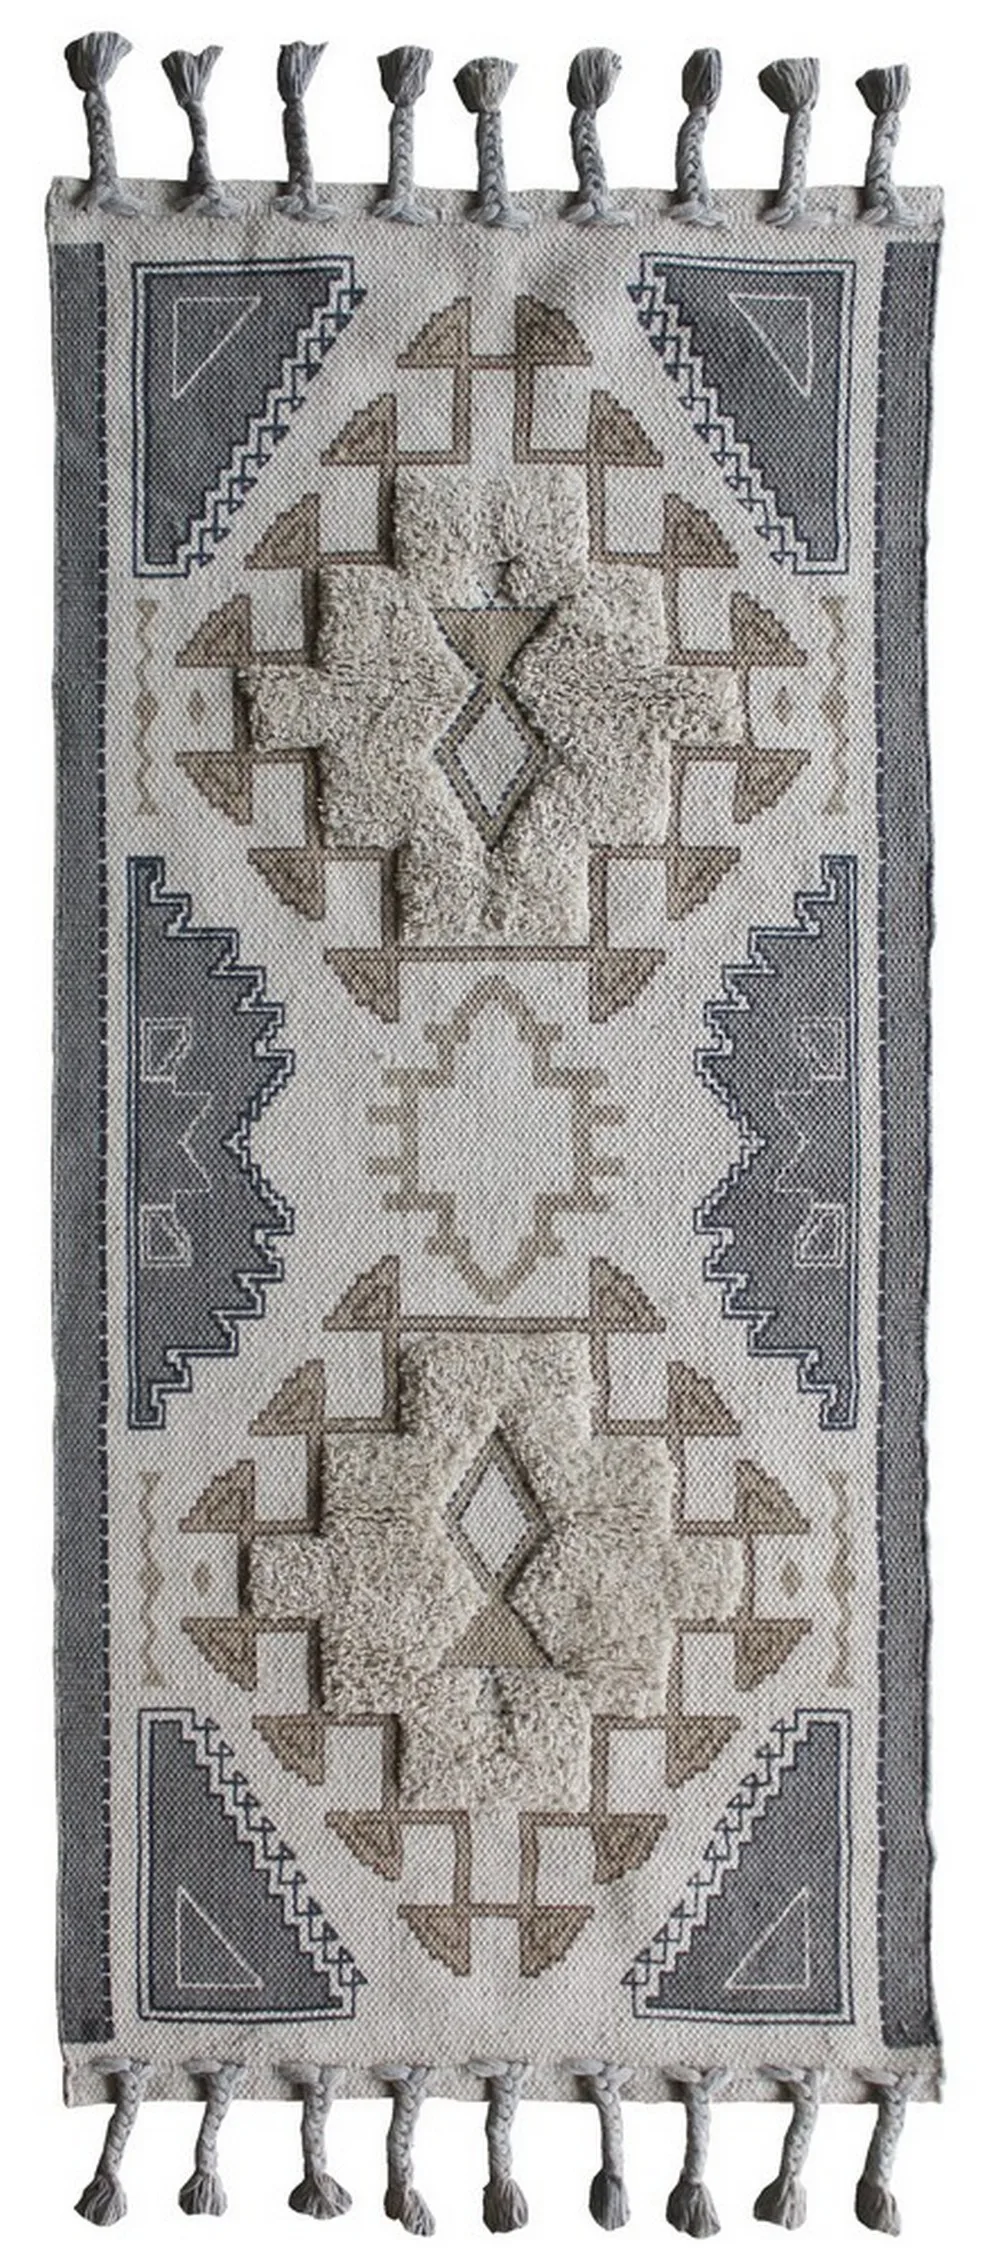 Tufted Printed Cotton Dhurrie Bedside runner with Tassels, Grey, Brown, 63x31 inches